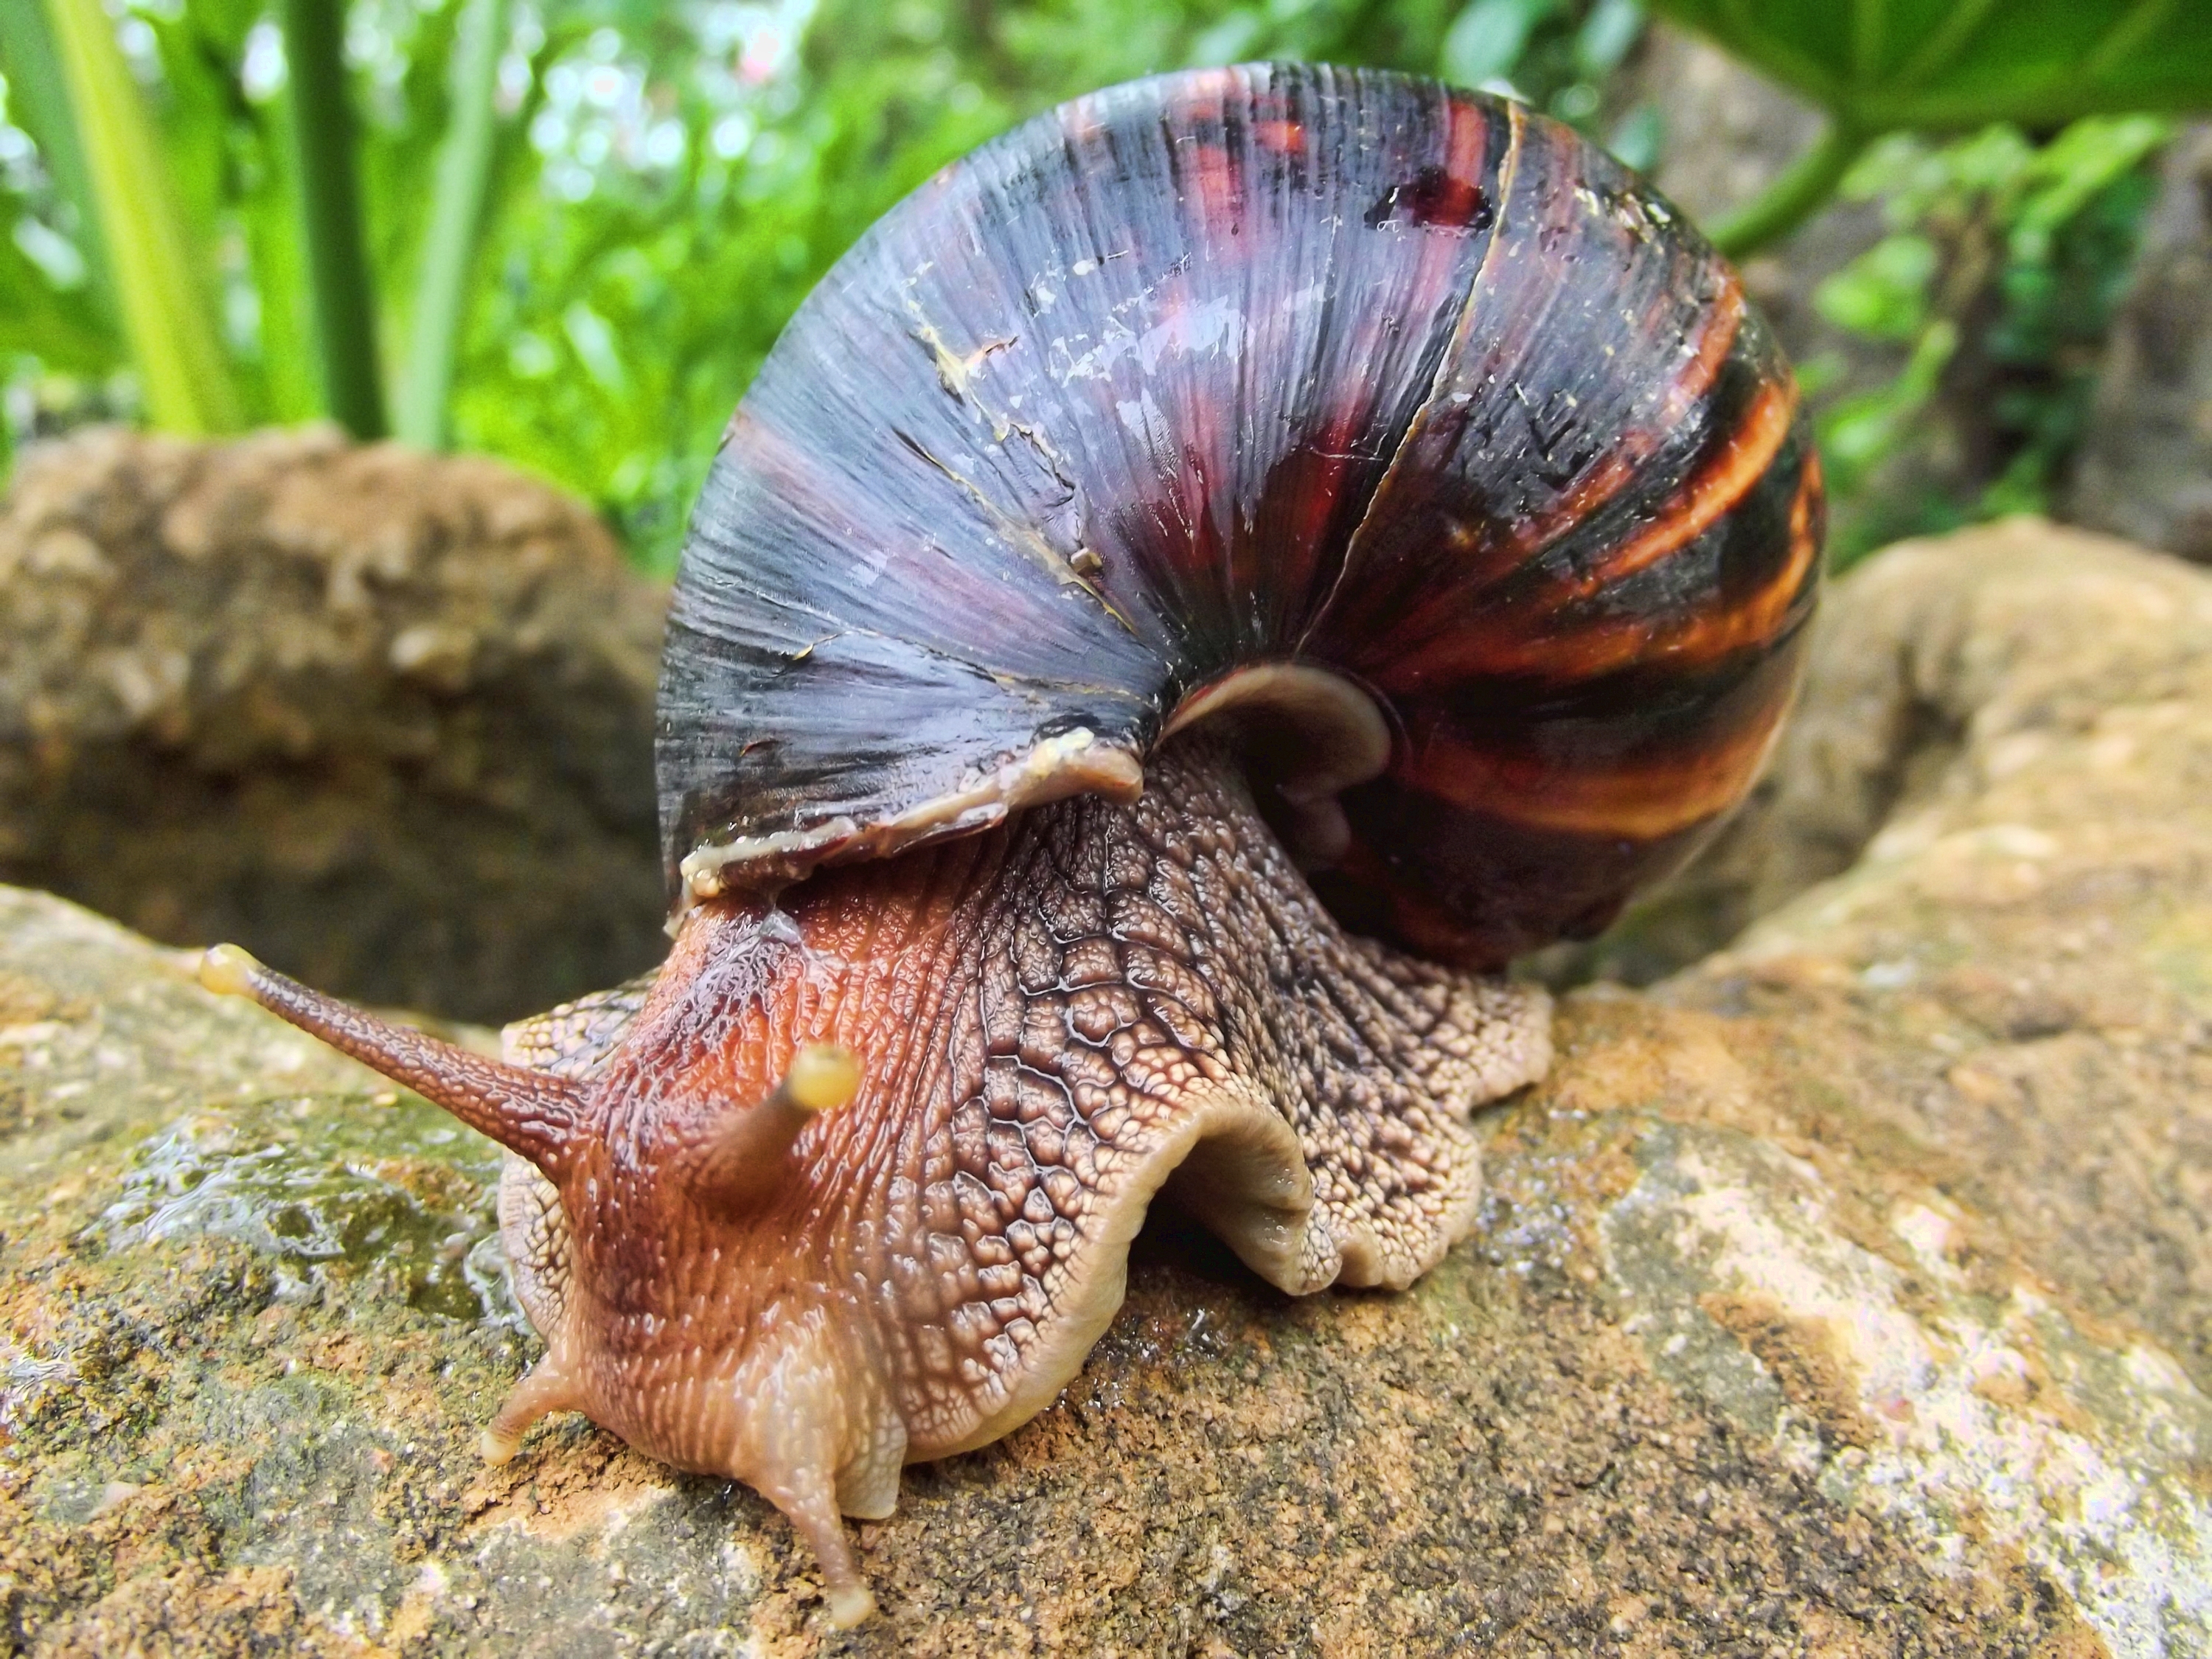 File:Giant African Land Snail.jpg - Wikimedia Commons